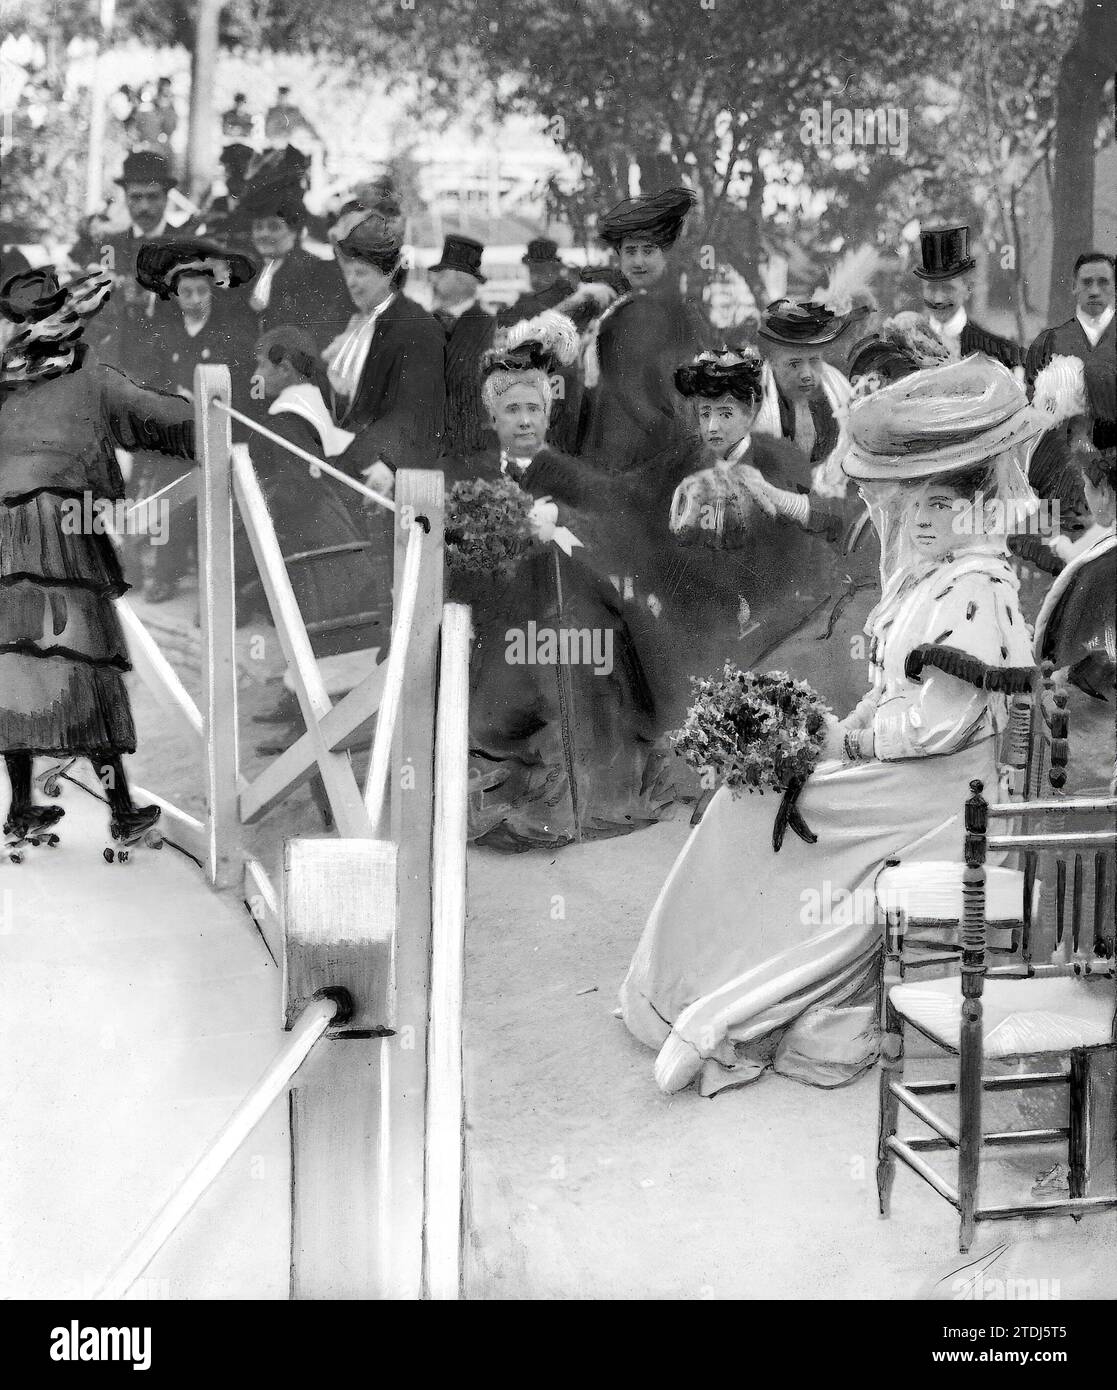 03/08/1907. Charity Party. Madrid. 'Garden Party' Held yesterday at the Salamanca recess to benefit the Poor of the parish of San José, and which was attended by Ss. Ah. the Infantas Doña Isabel and Doña Eulalia. Credit: Album / Archivo ABC / Francisco Goñi Stock Photo